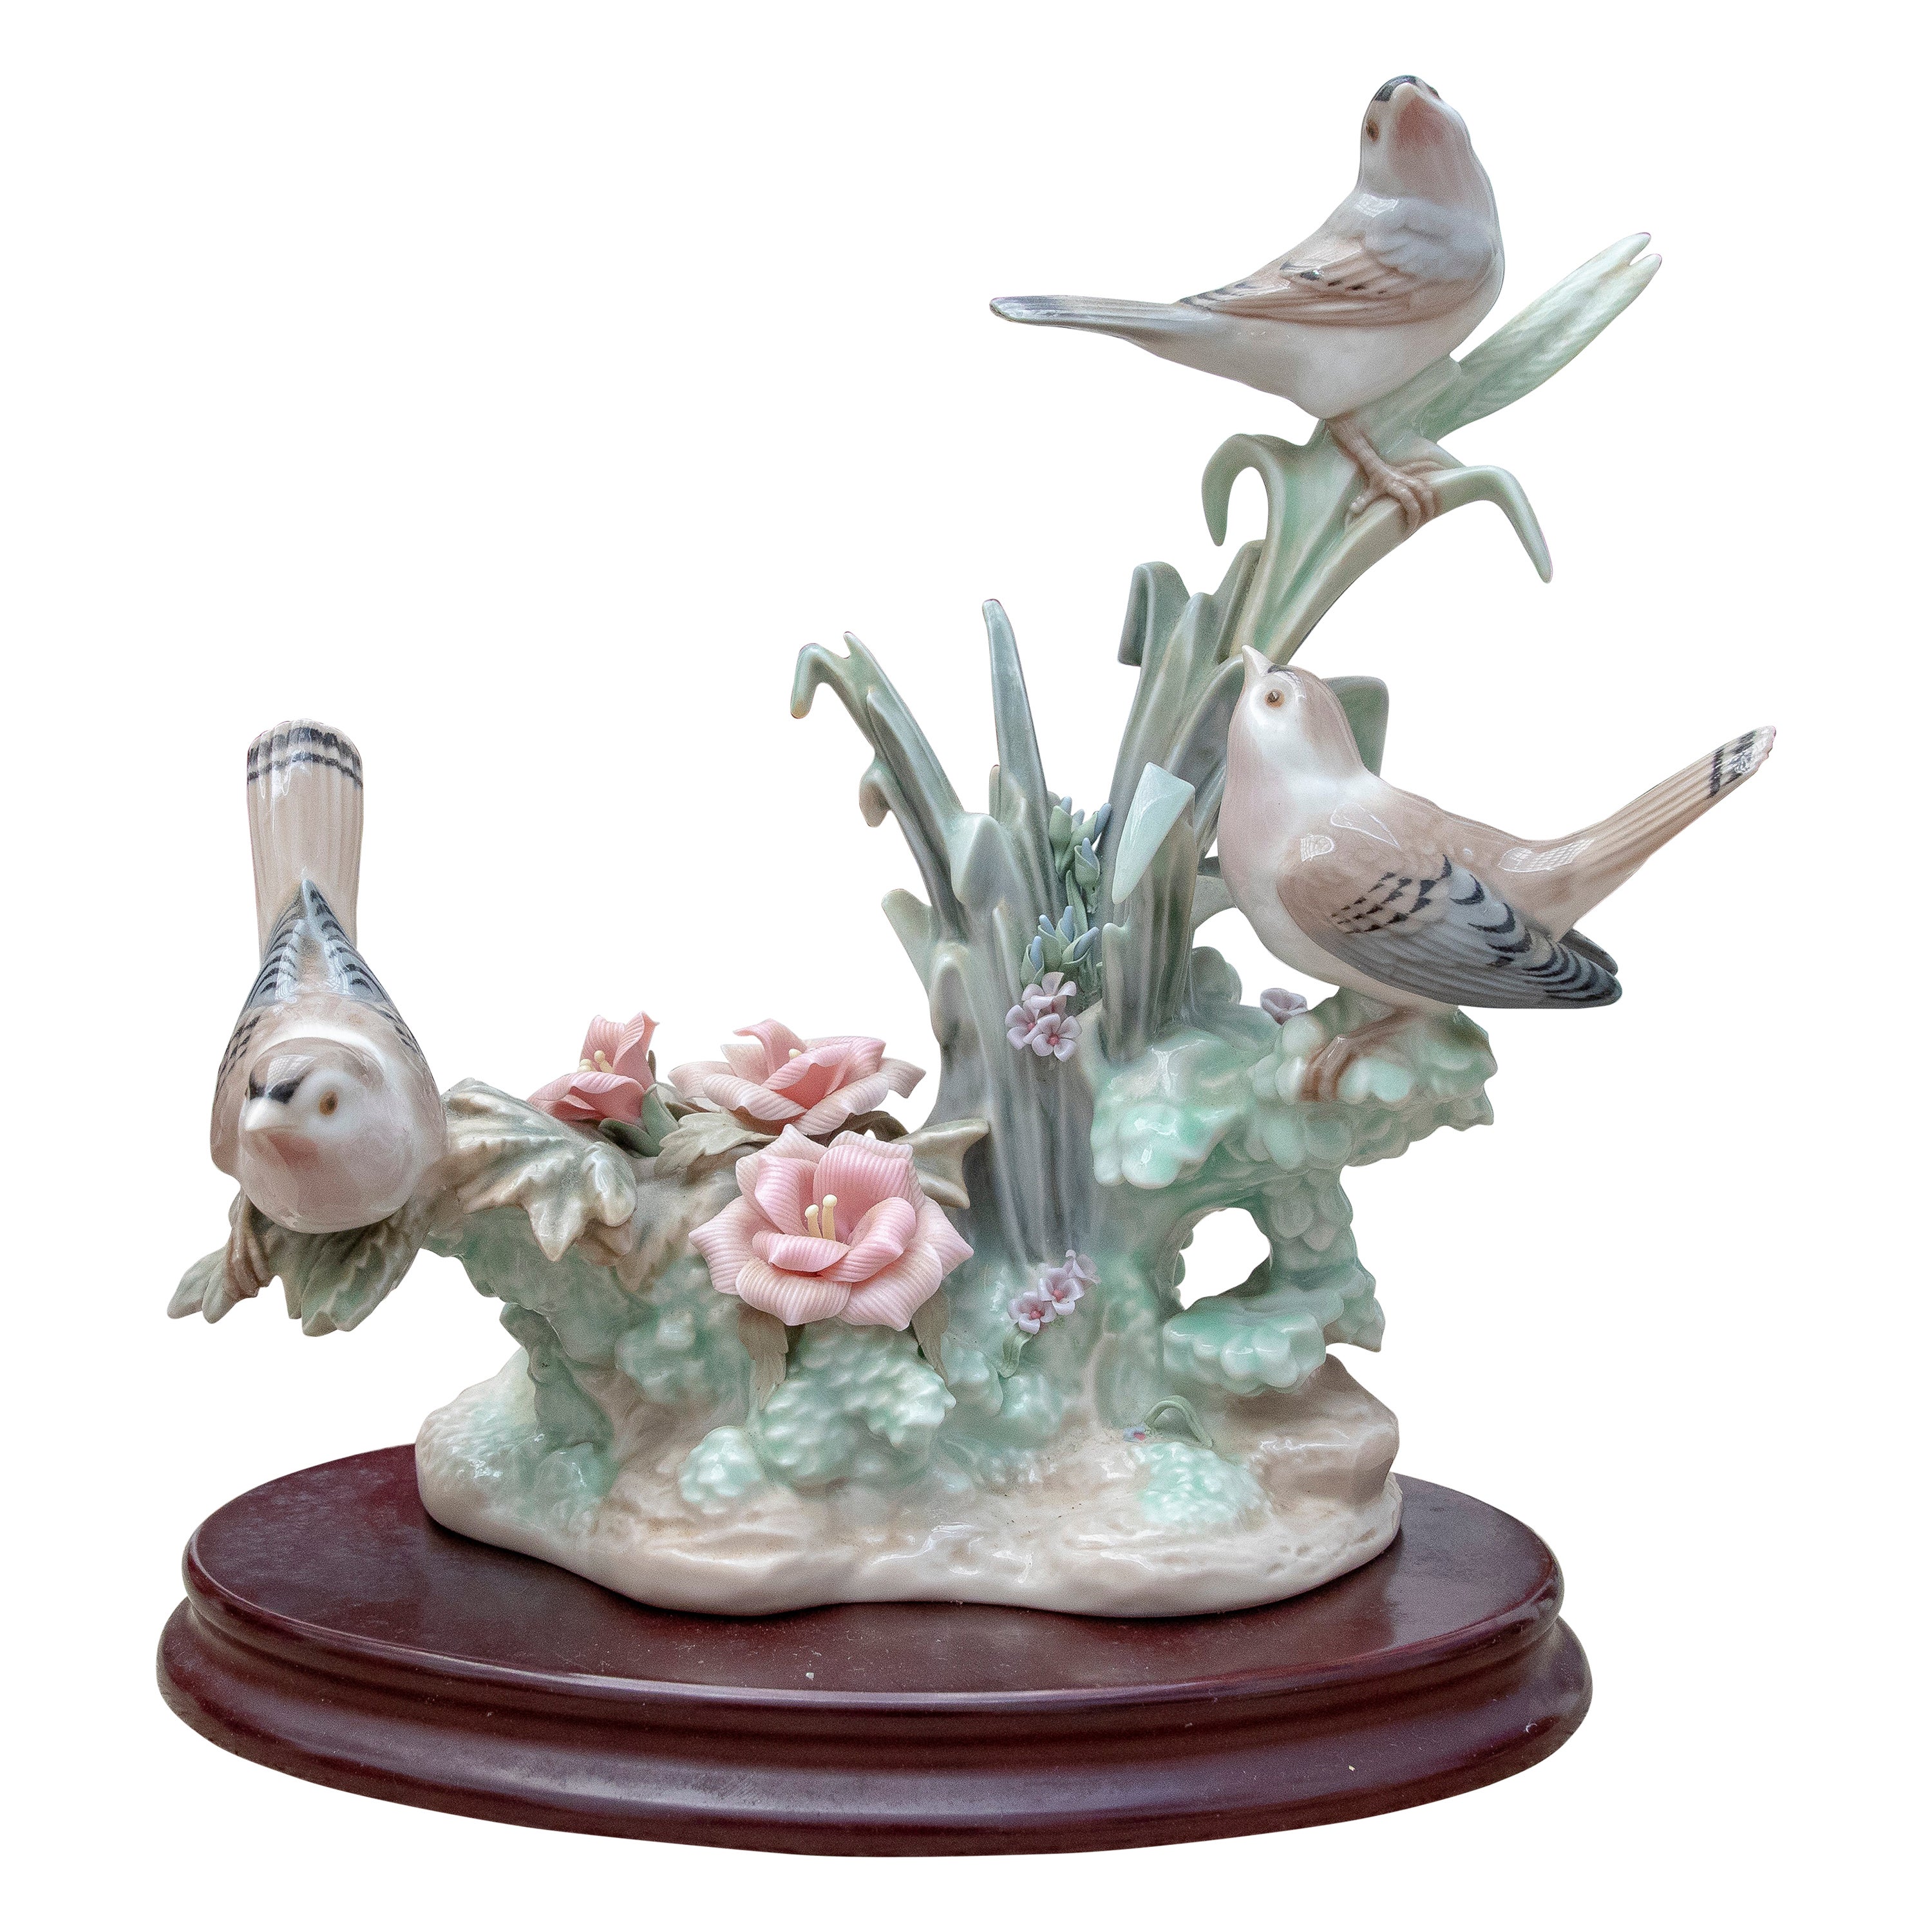 Lladró Porcelain Figurine of a Group of Birds Dated from 1978 For Sale